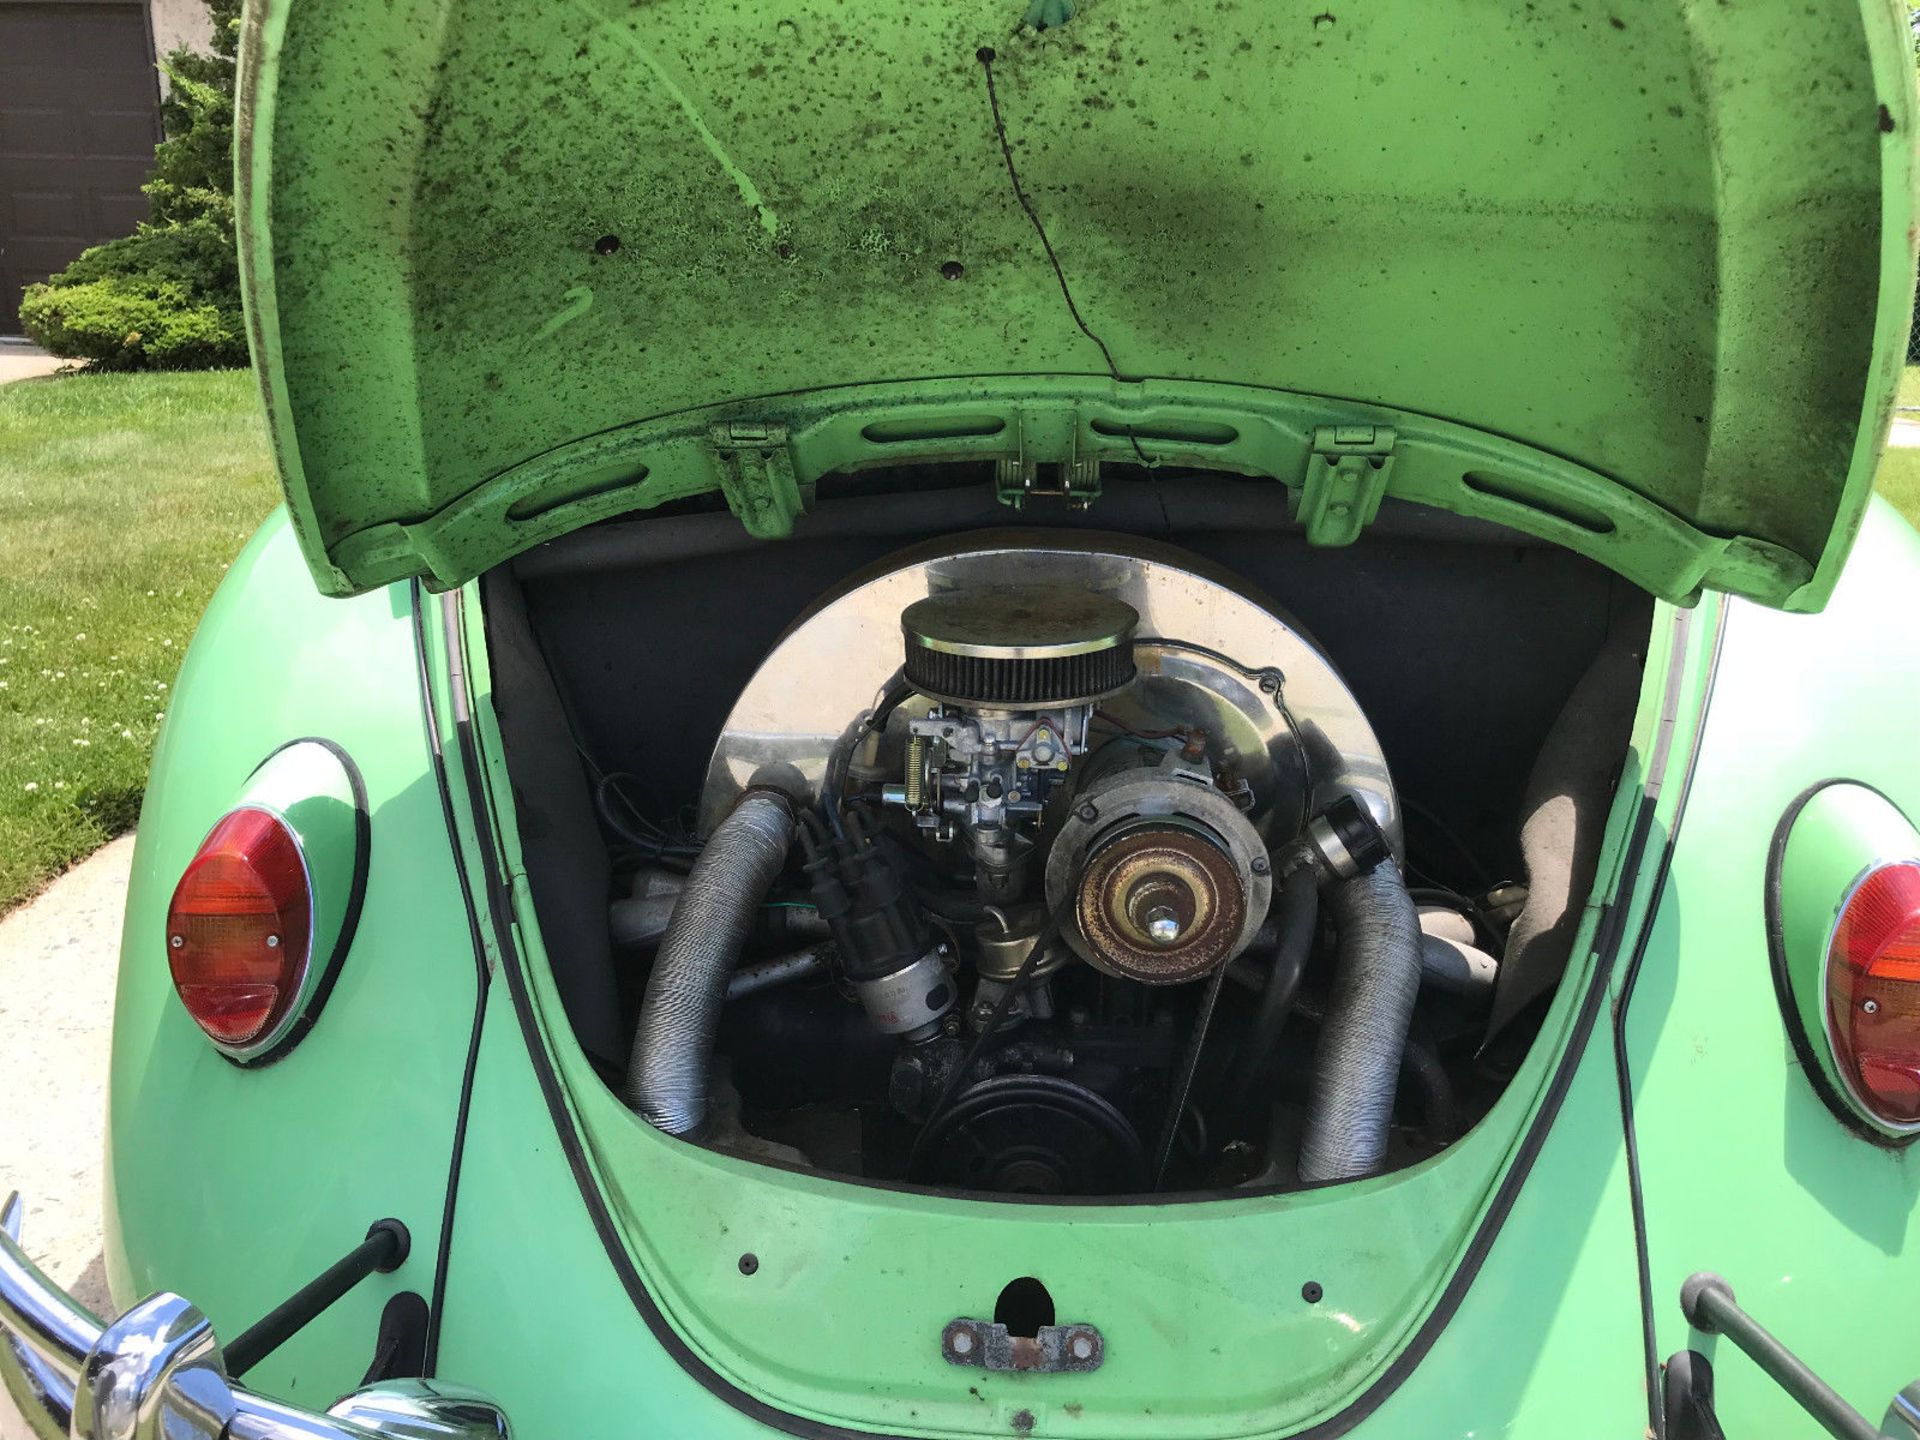 1967 Volkswagen Beetle - Classic, BRAND NEW INTERIOR, VERY COLLECTIBLE, BEATLES GREEN, LOCATION NY - Image 5 of 10